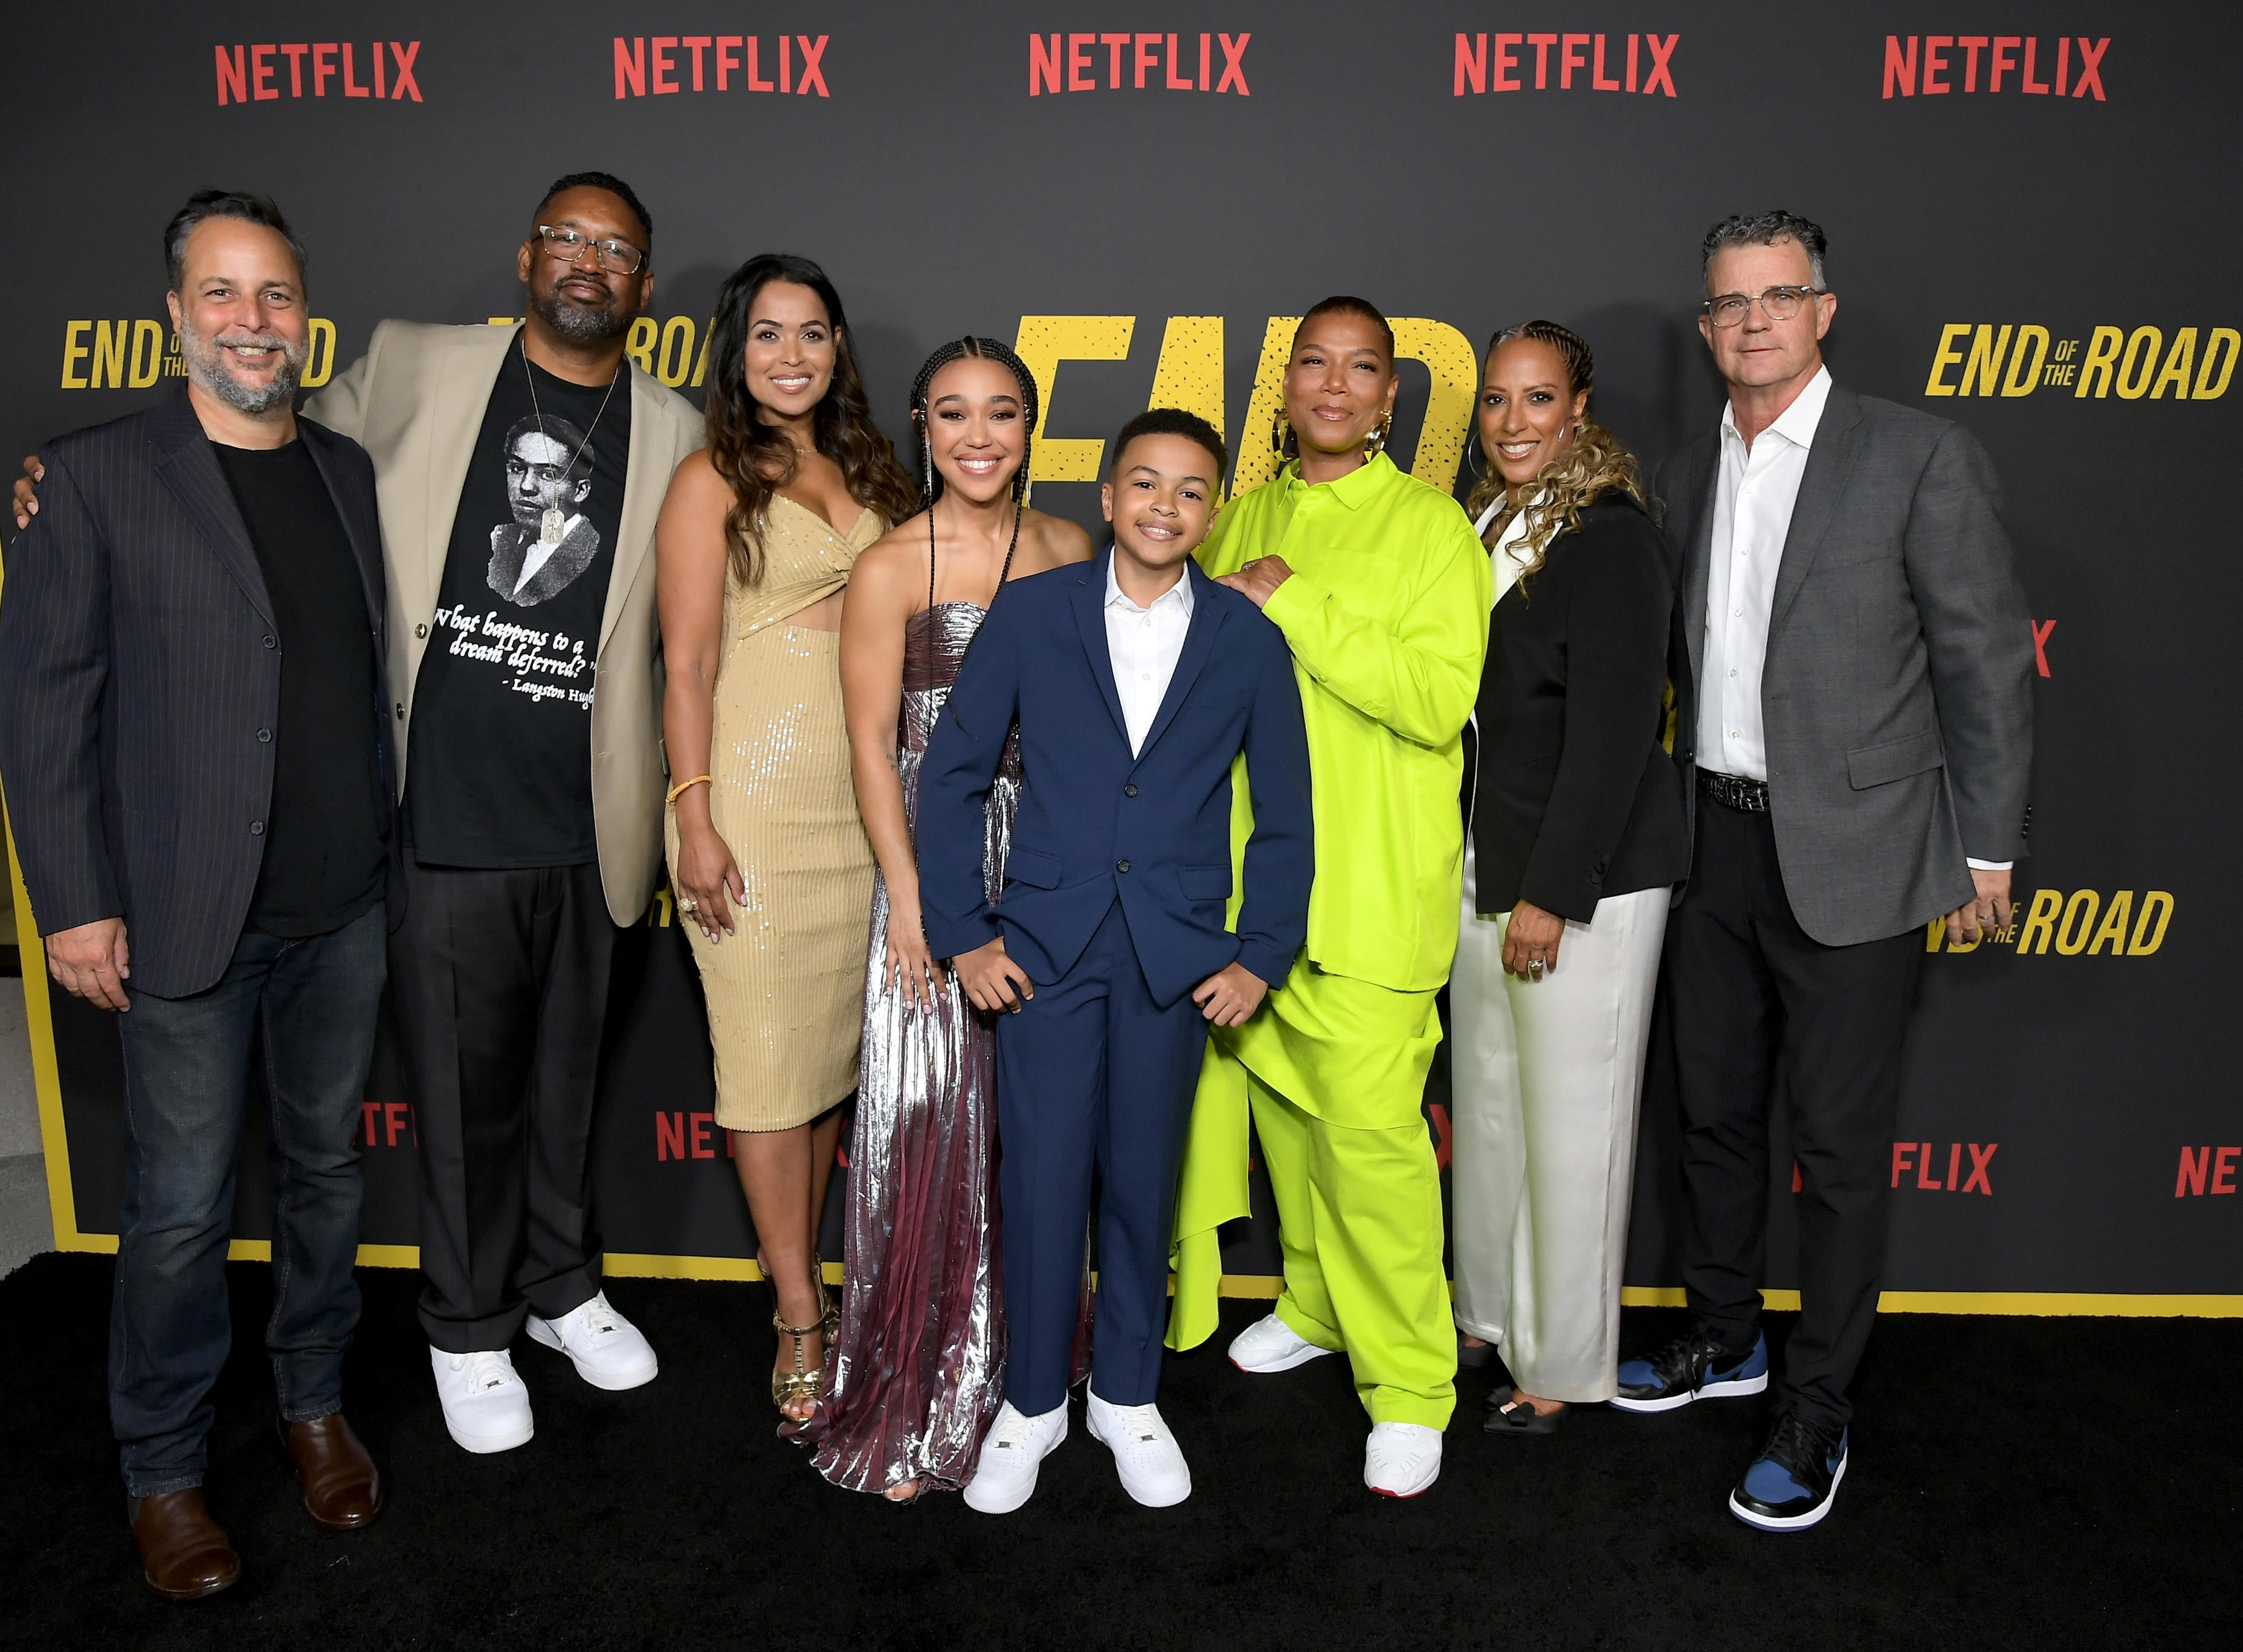 Netflix's End of The Road LA Special Screening